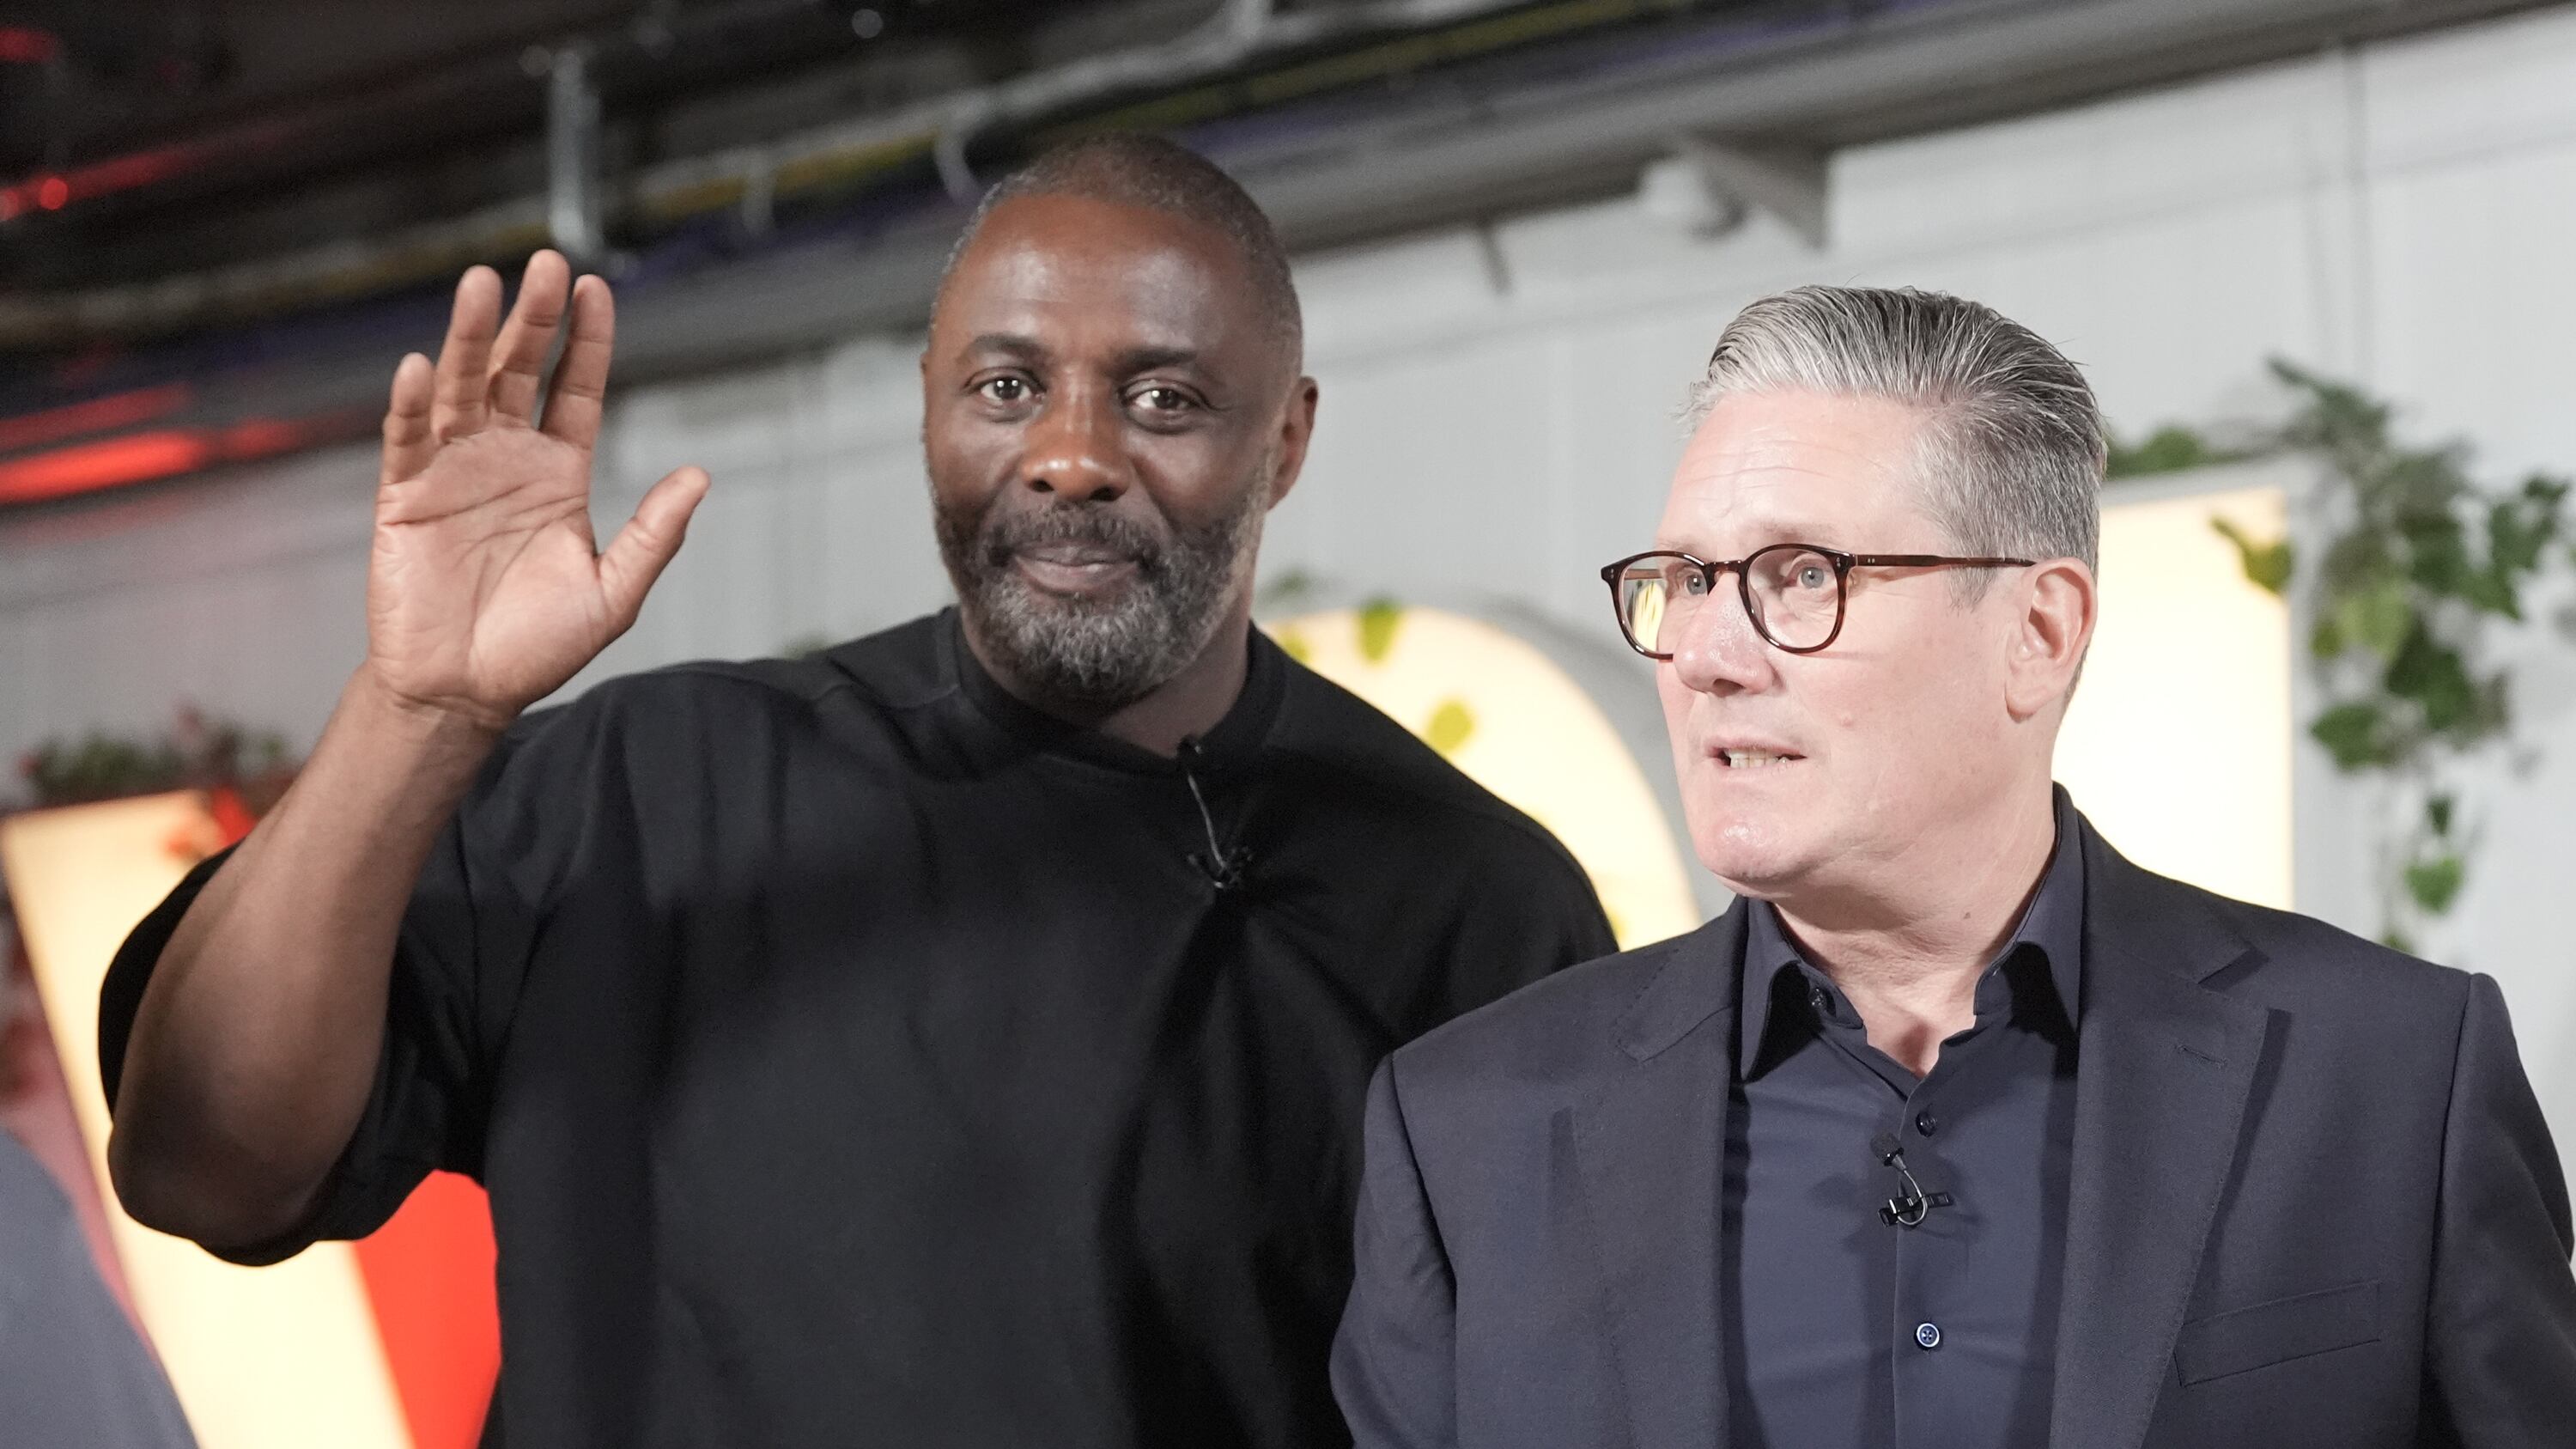 Idris Elba and Labour leader Sir Keir Starmer meet families of knife crime victims at the Lyric Theatre in Hammersmith, west London